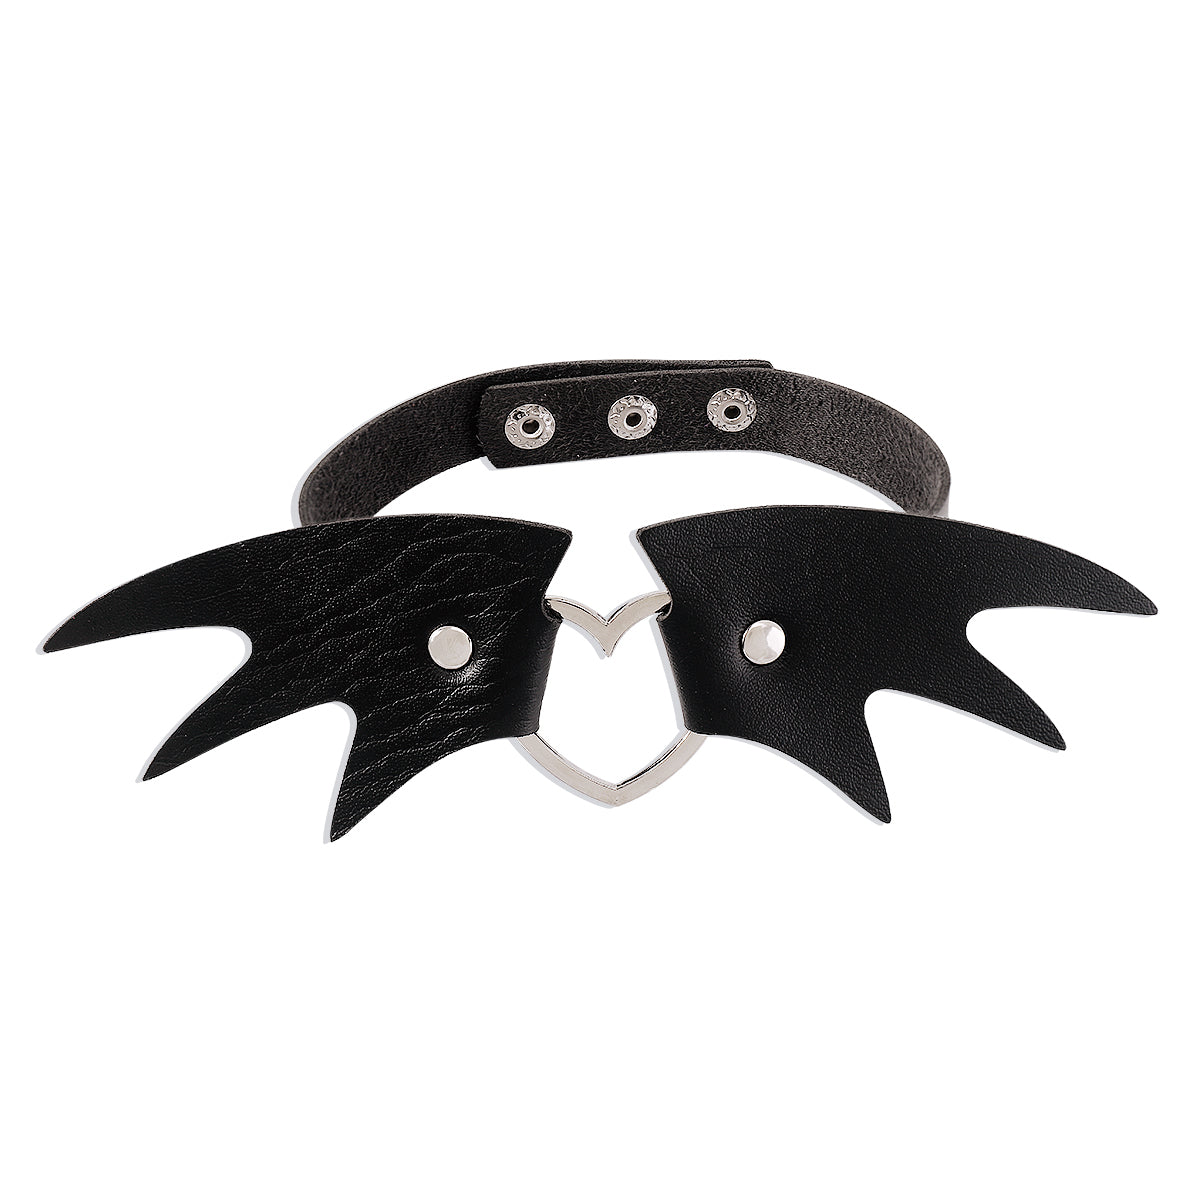 Black Polystyrene & Silver-Plated Bat Wing Heart Choker Necklace